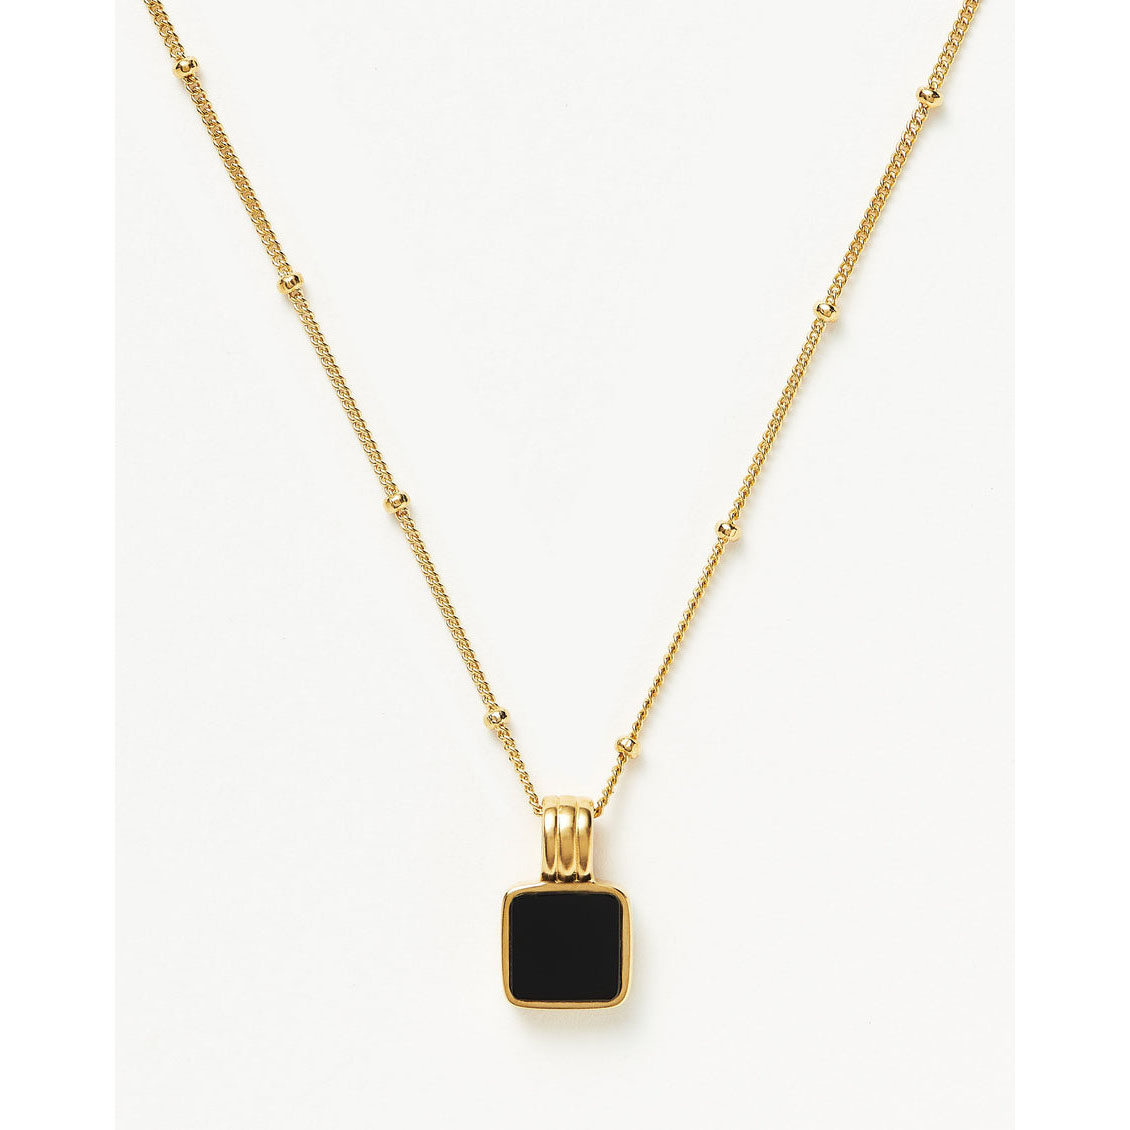 Custom made square black  onyx necklace in 18k gold plated vermeil 925 sterling silver